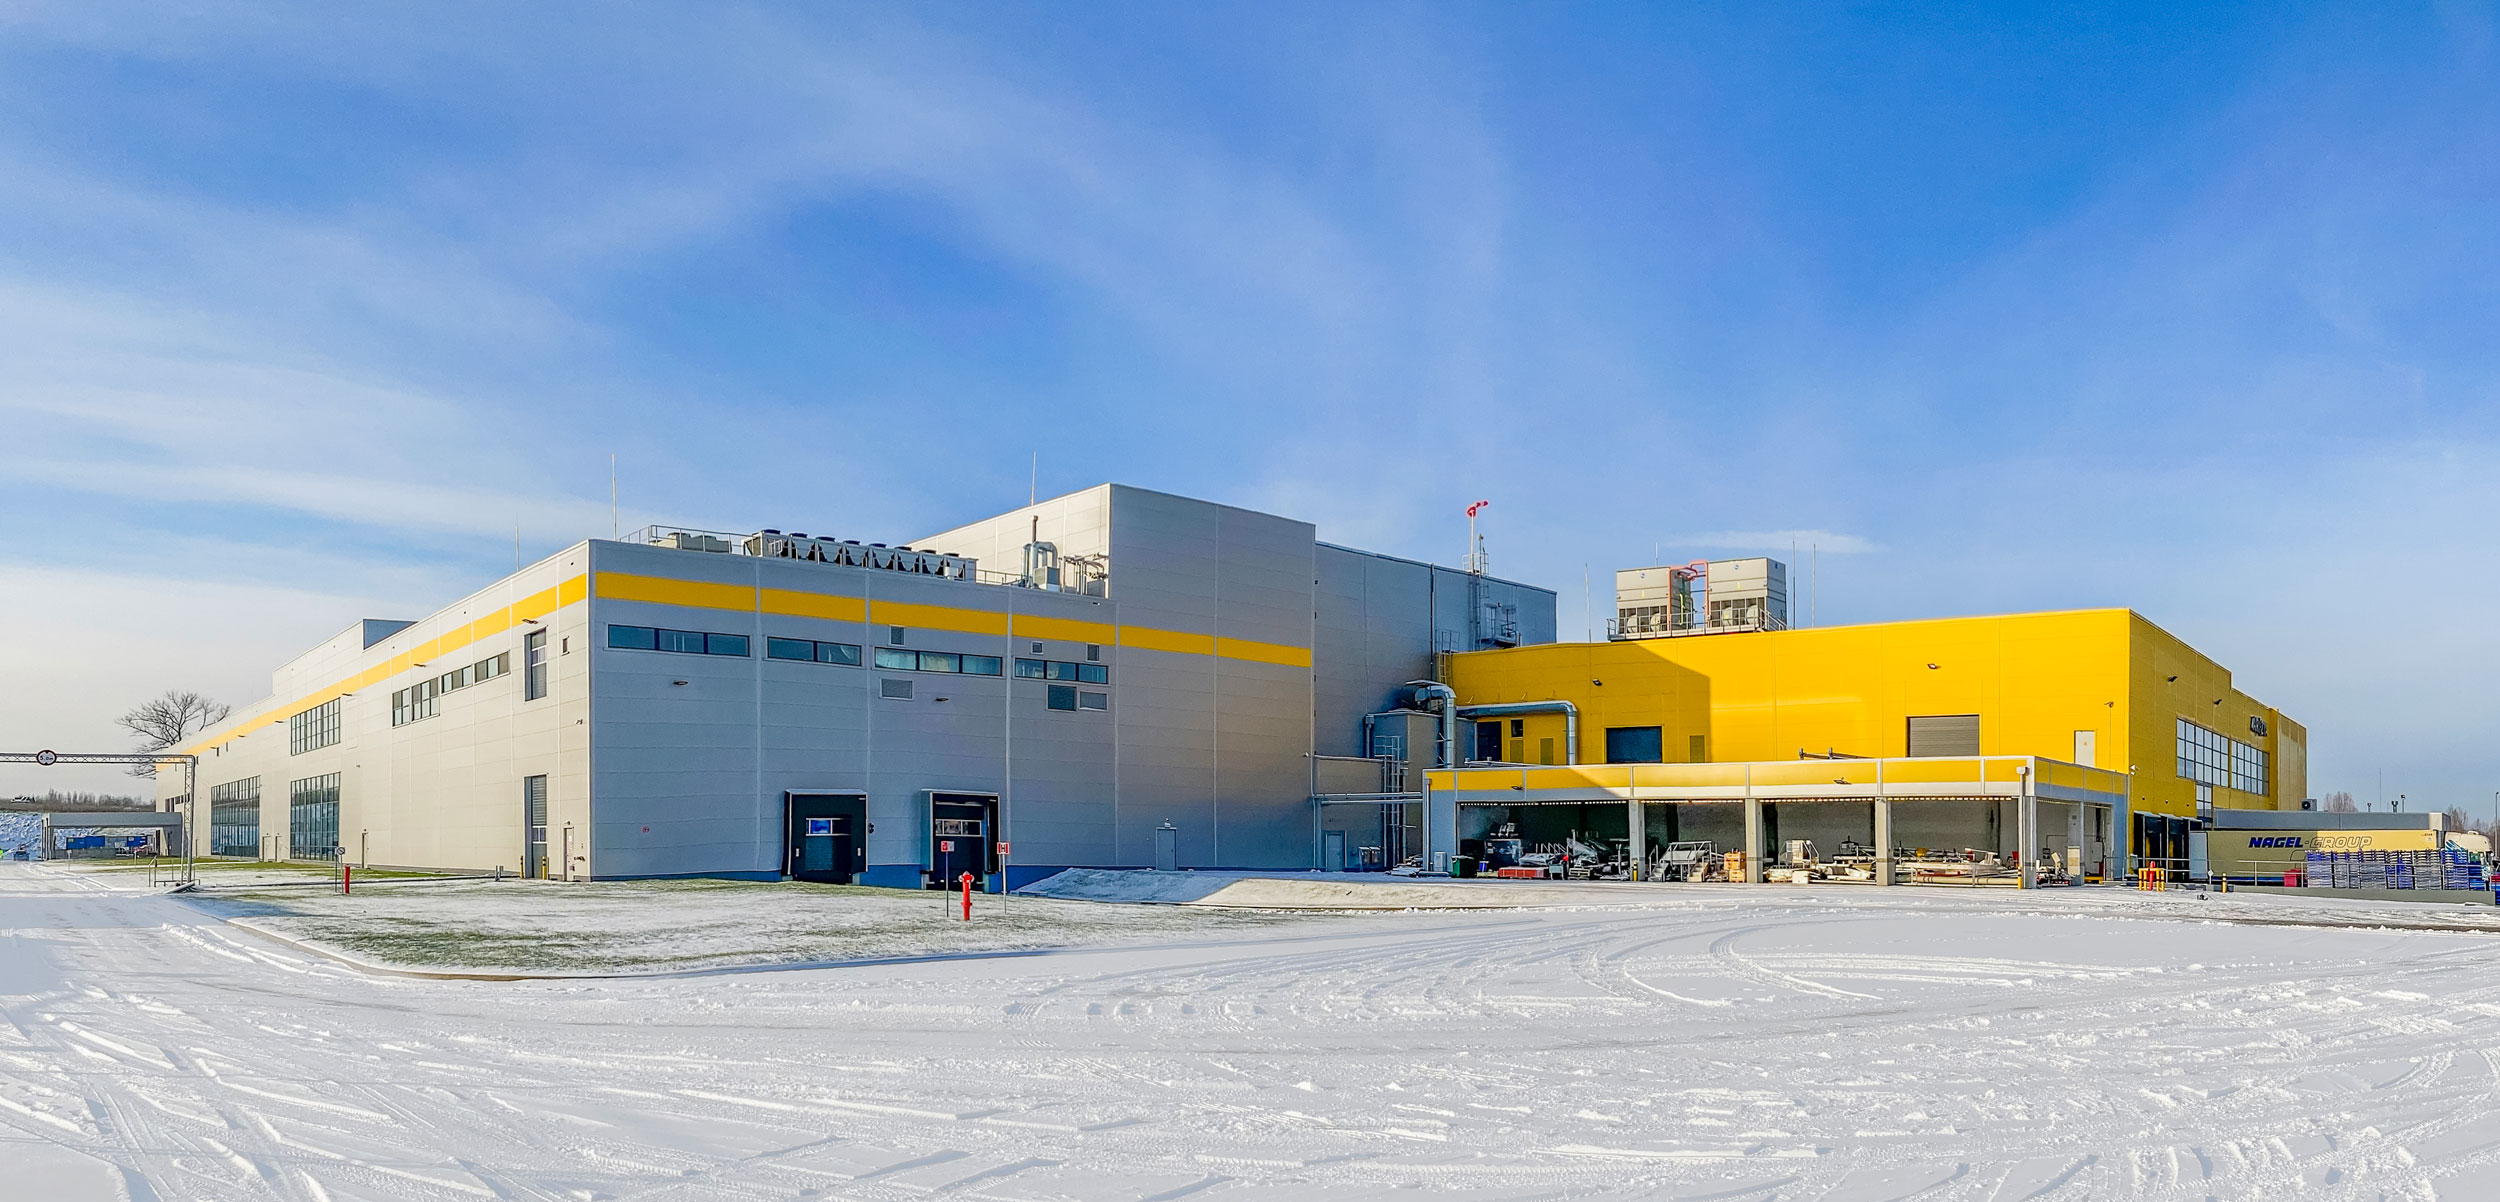 Modern industrial building with yellow and white facade in winter conditions with snow on the ground.